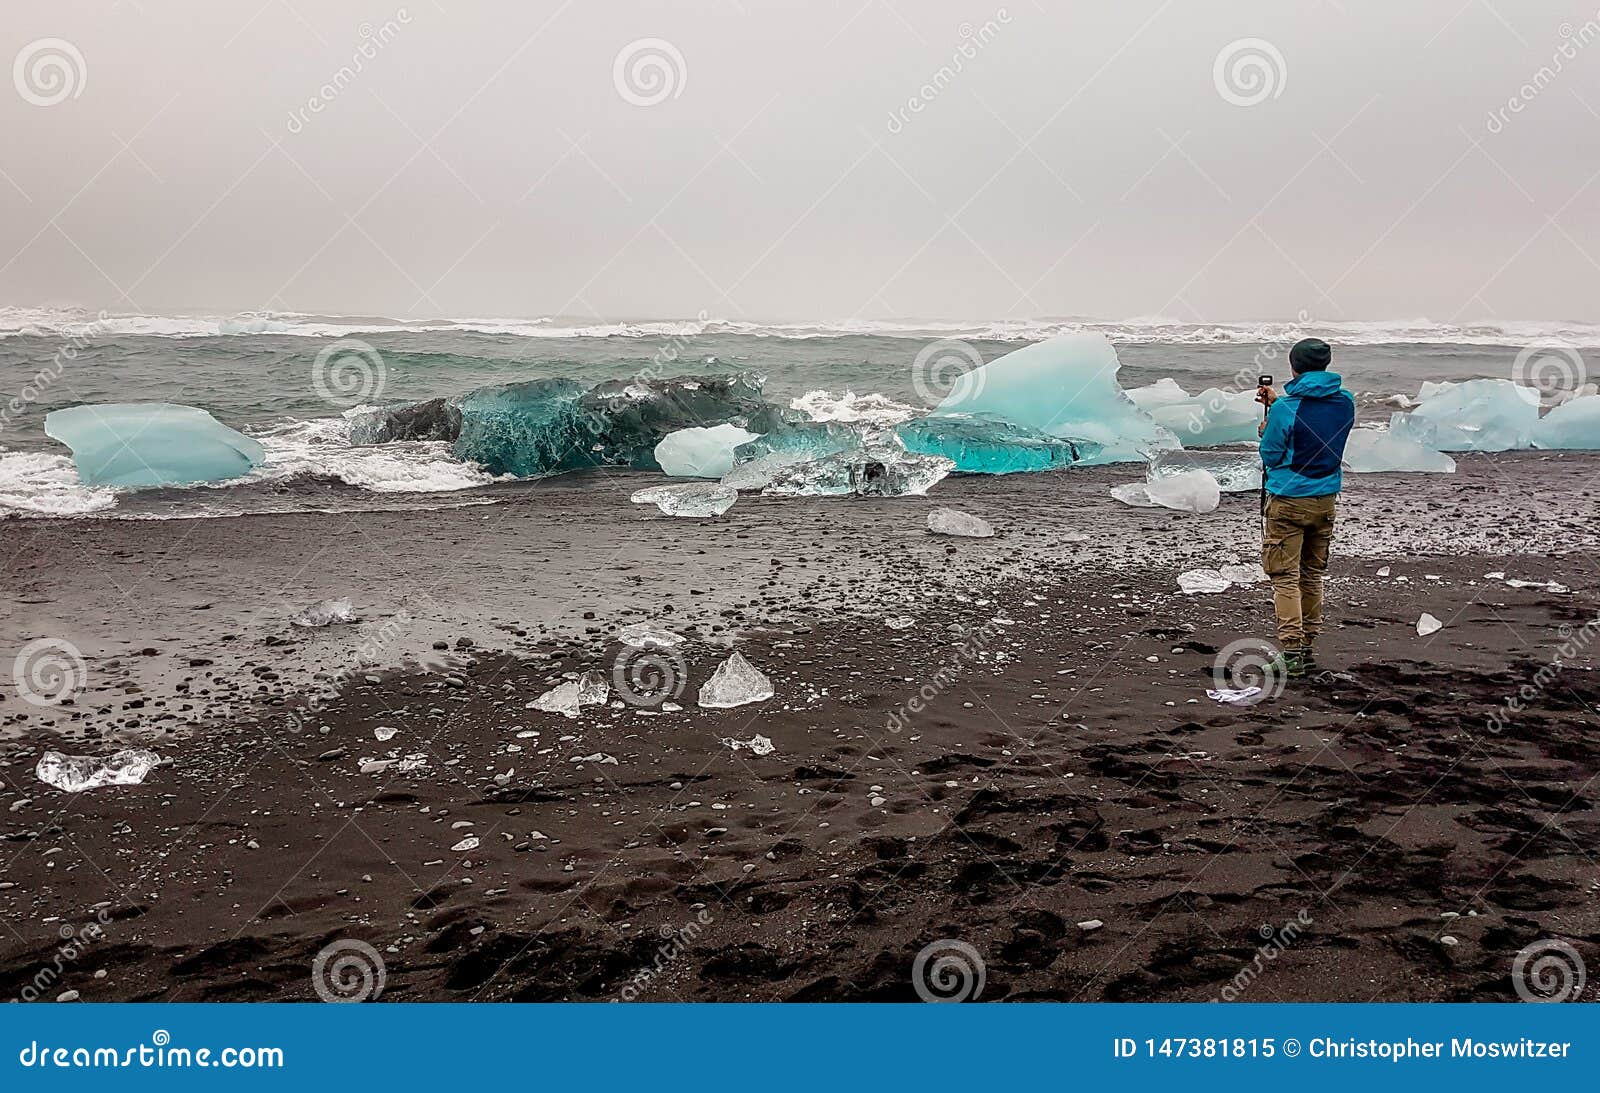 Iceland Young Man At The Diamond Beach With An Action Camera Stock Image Image Of Diamond Landscape